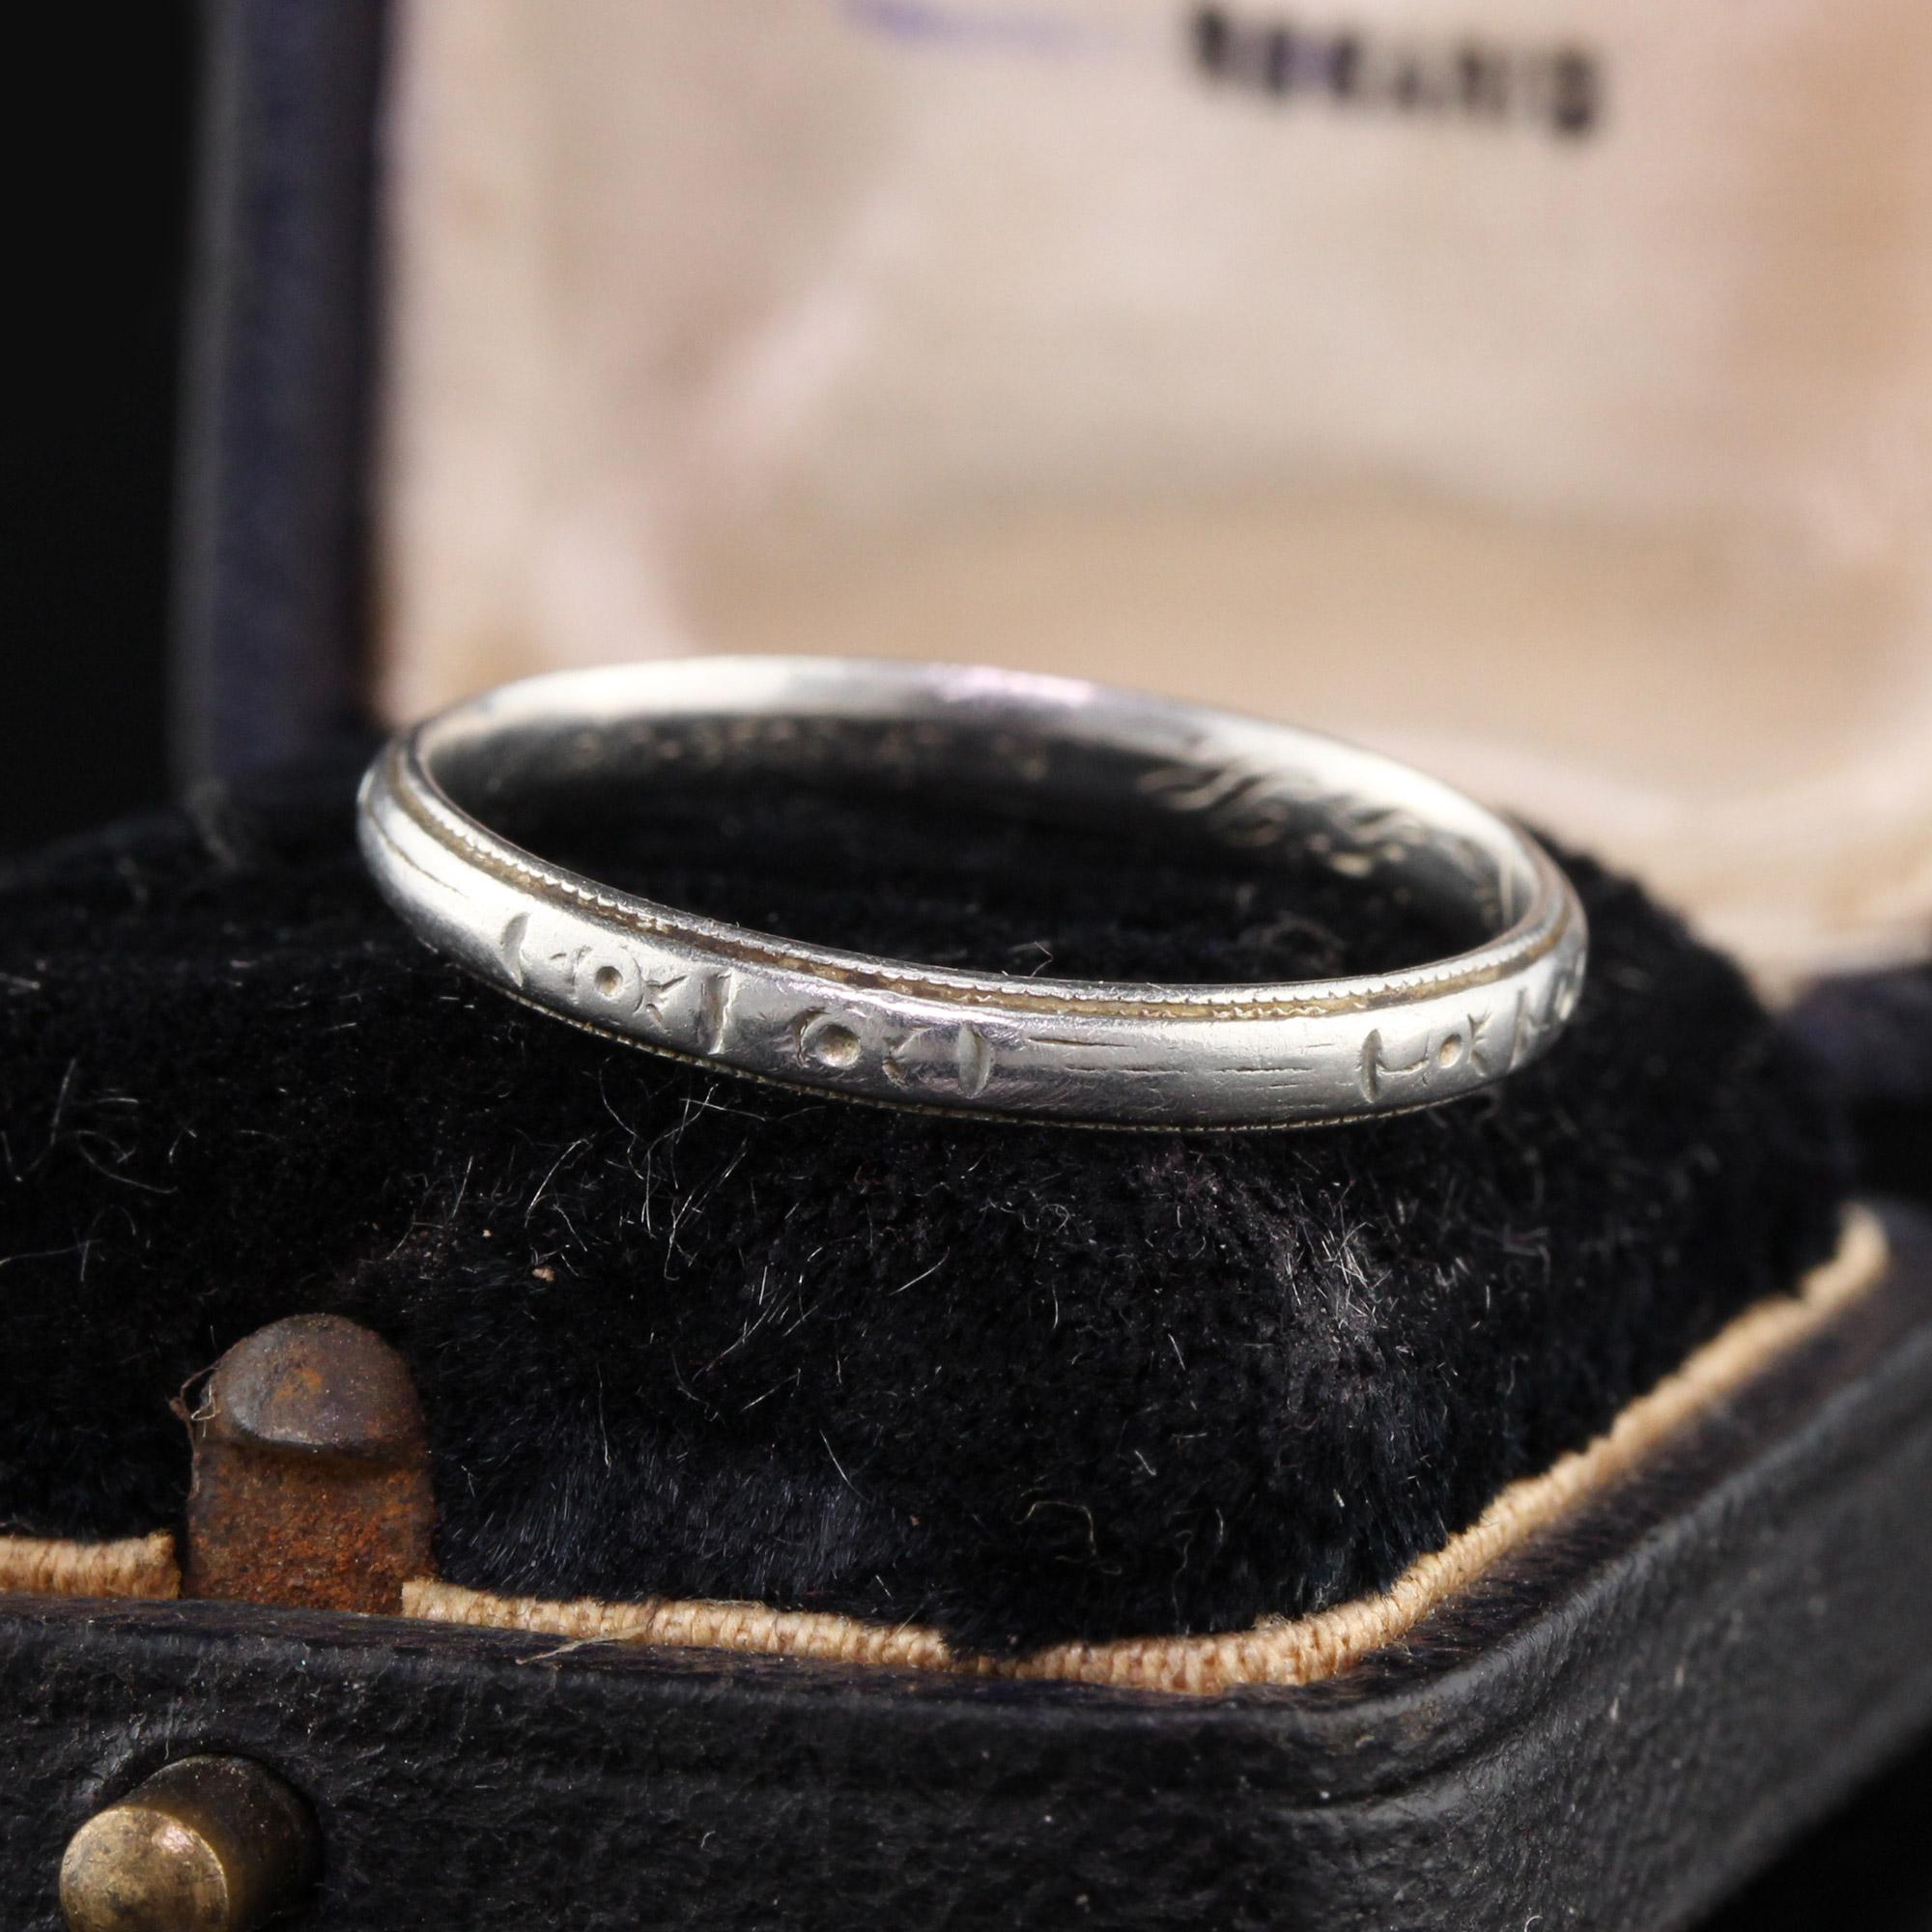 This is a gorgeous Art Deco Platinum Wedding Band Dated 6/15/30 and engraved initials.

#R0210

Metal: Platinum

Weight: 2.7 Grams

Ring Size: 7

*Unfortunately this ring cannot be sized

Measurements: 2.4 mm wide

Measurement from finger to top of